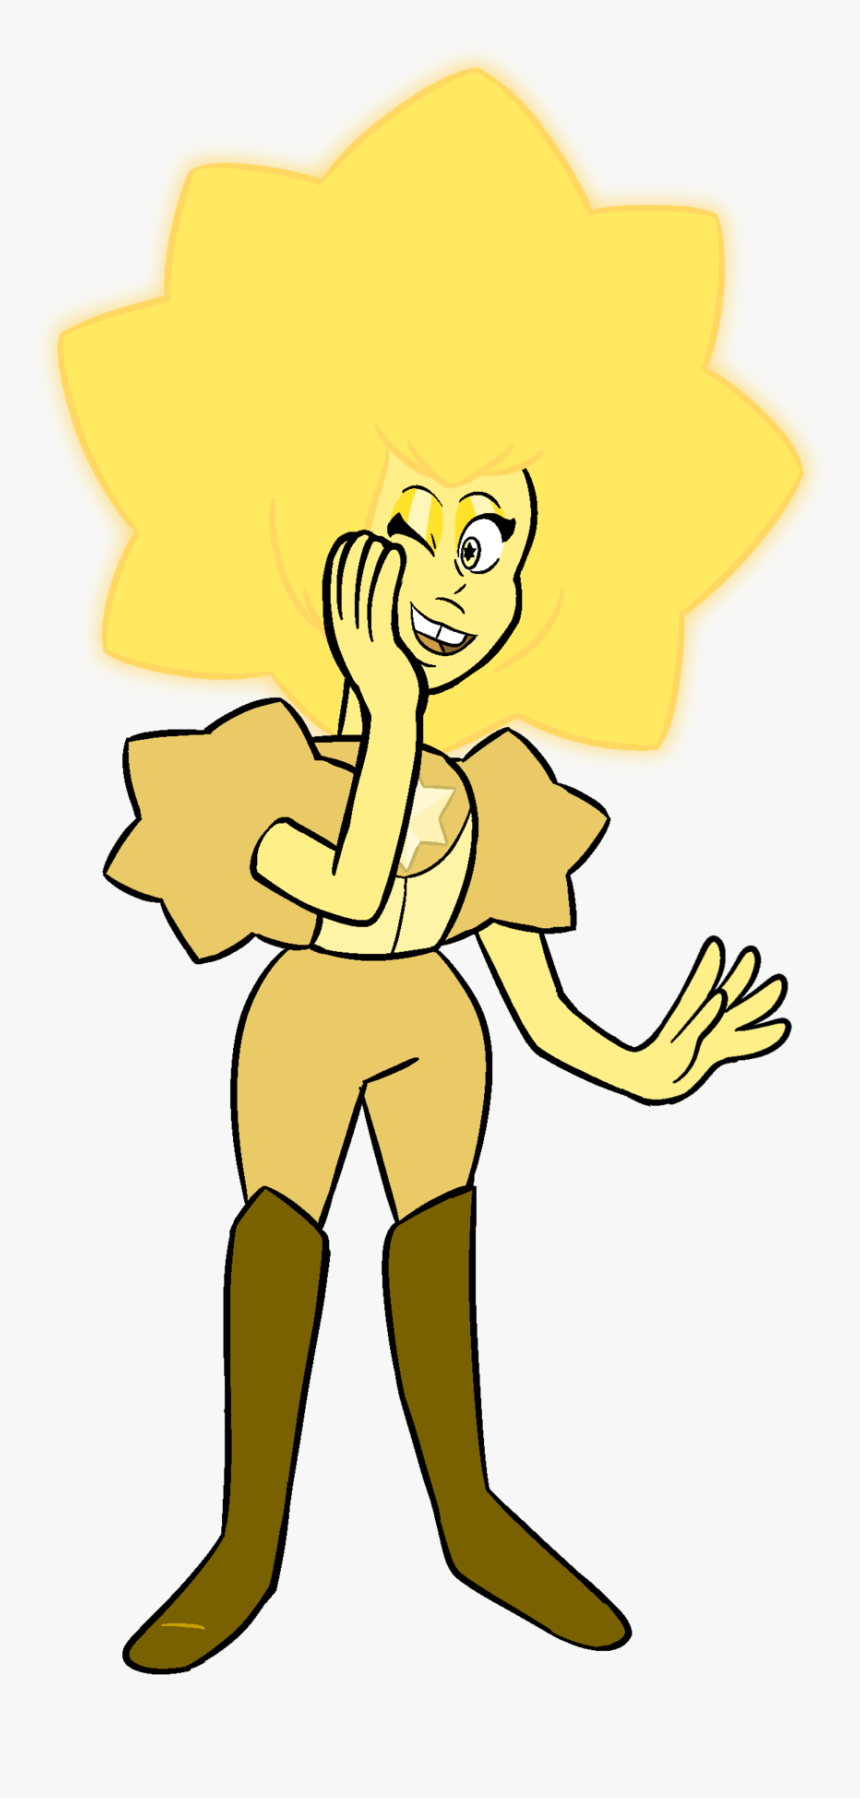 Image - Canary Diamond Steven Universe, HD Png Download, Free Download